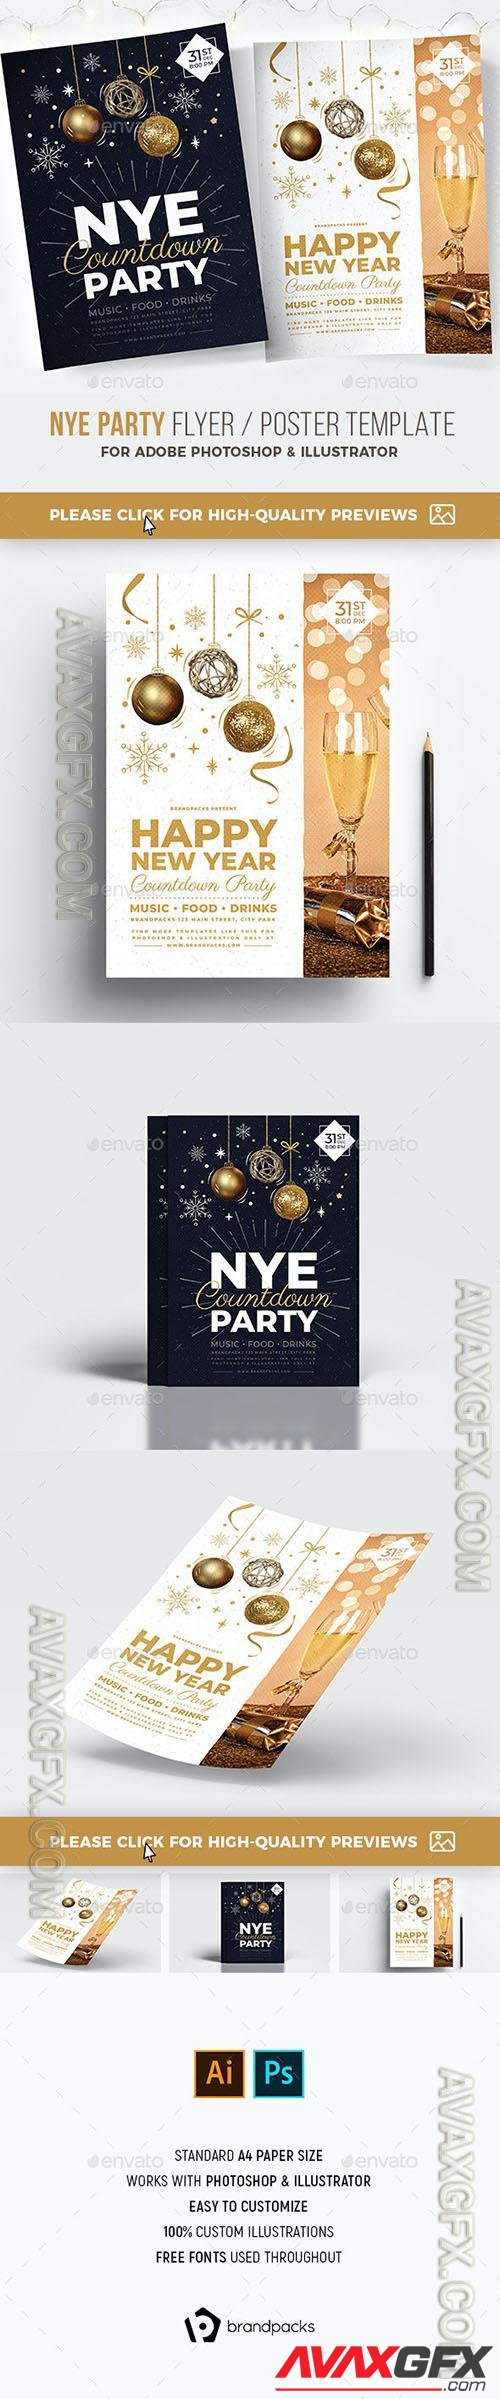 NYE Party Poster / Flyer N5BBCQK